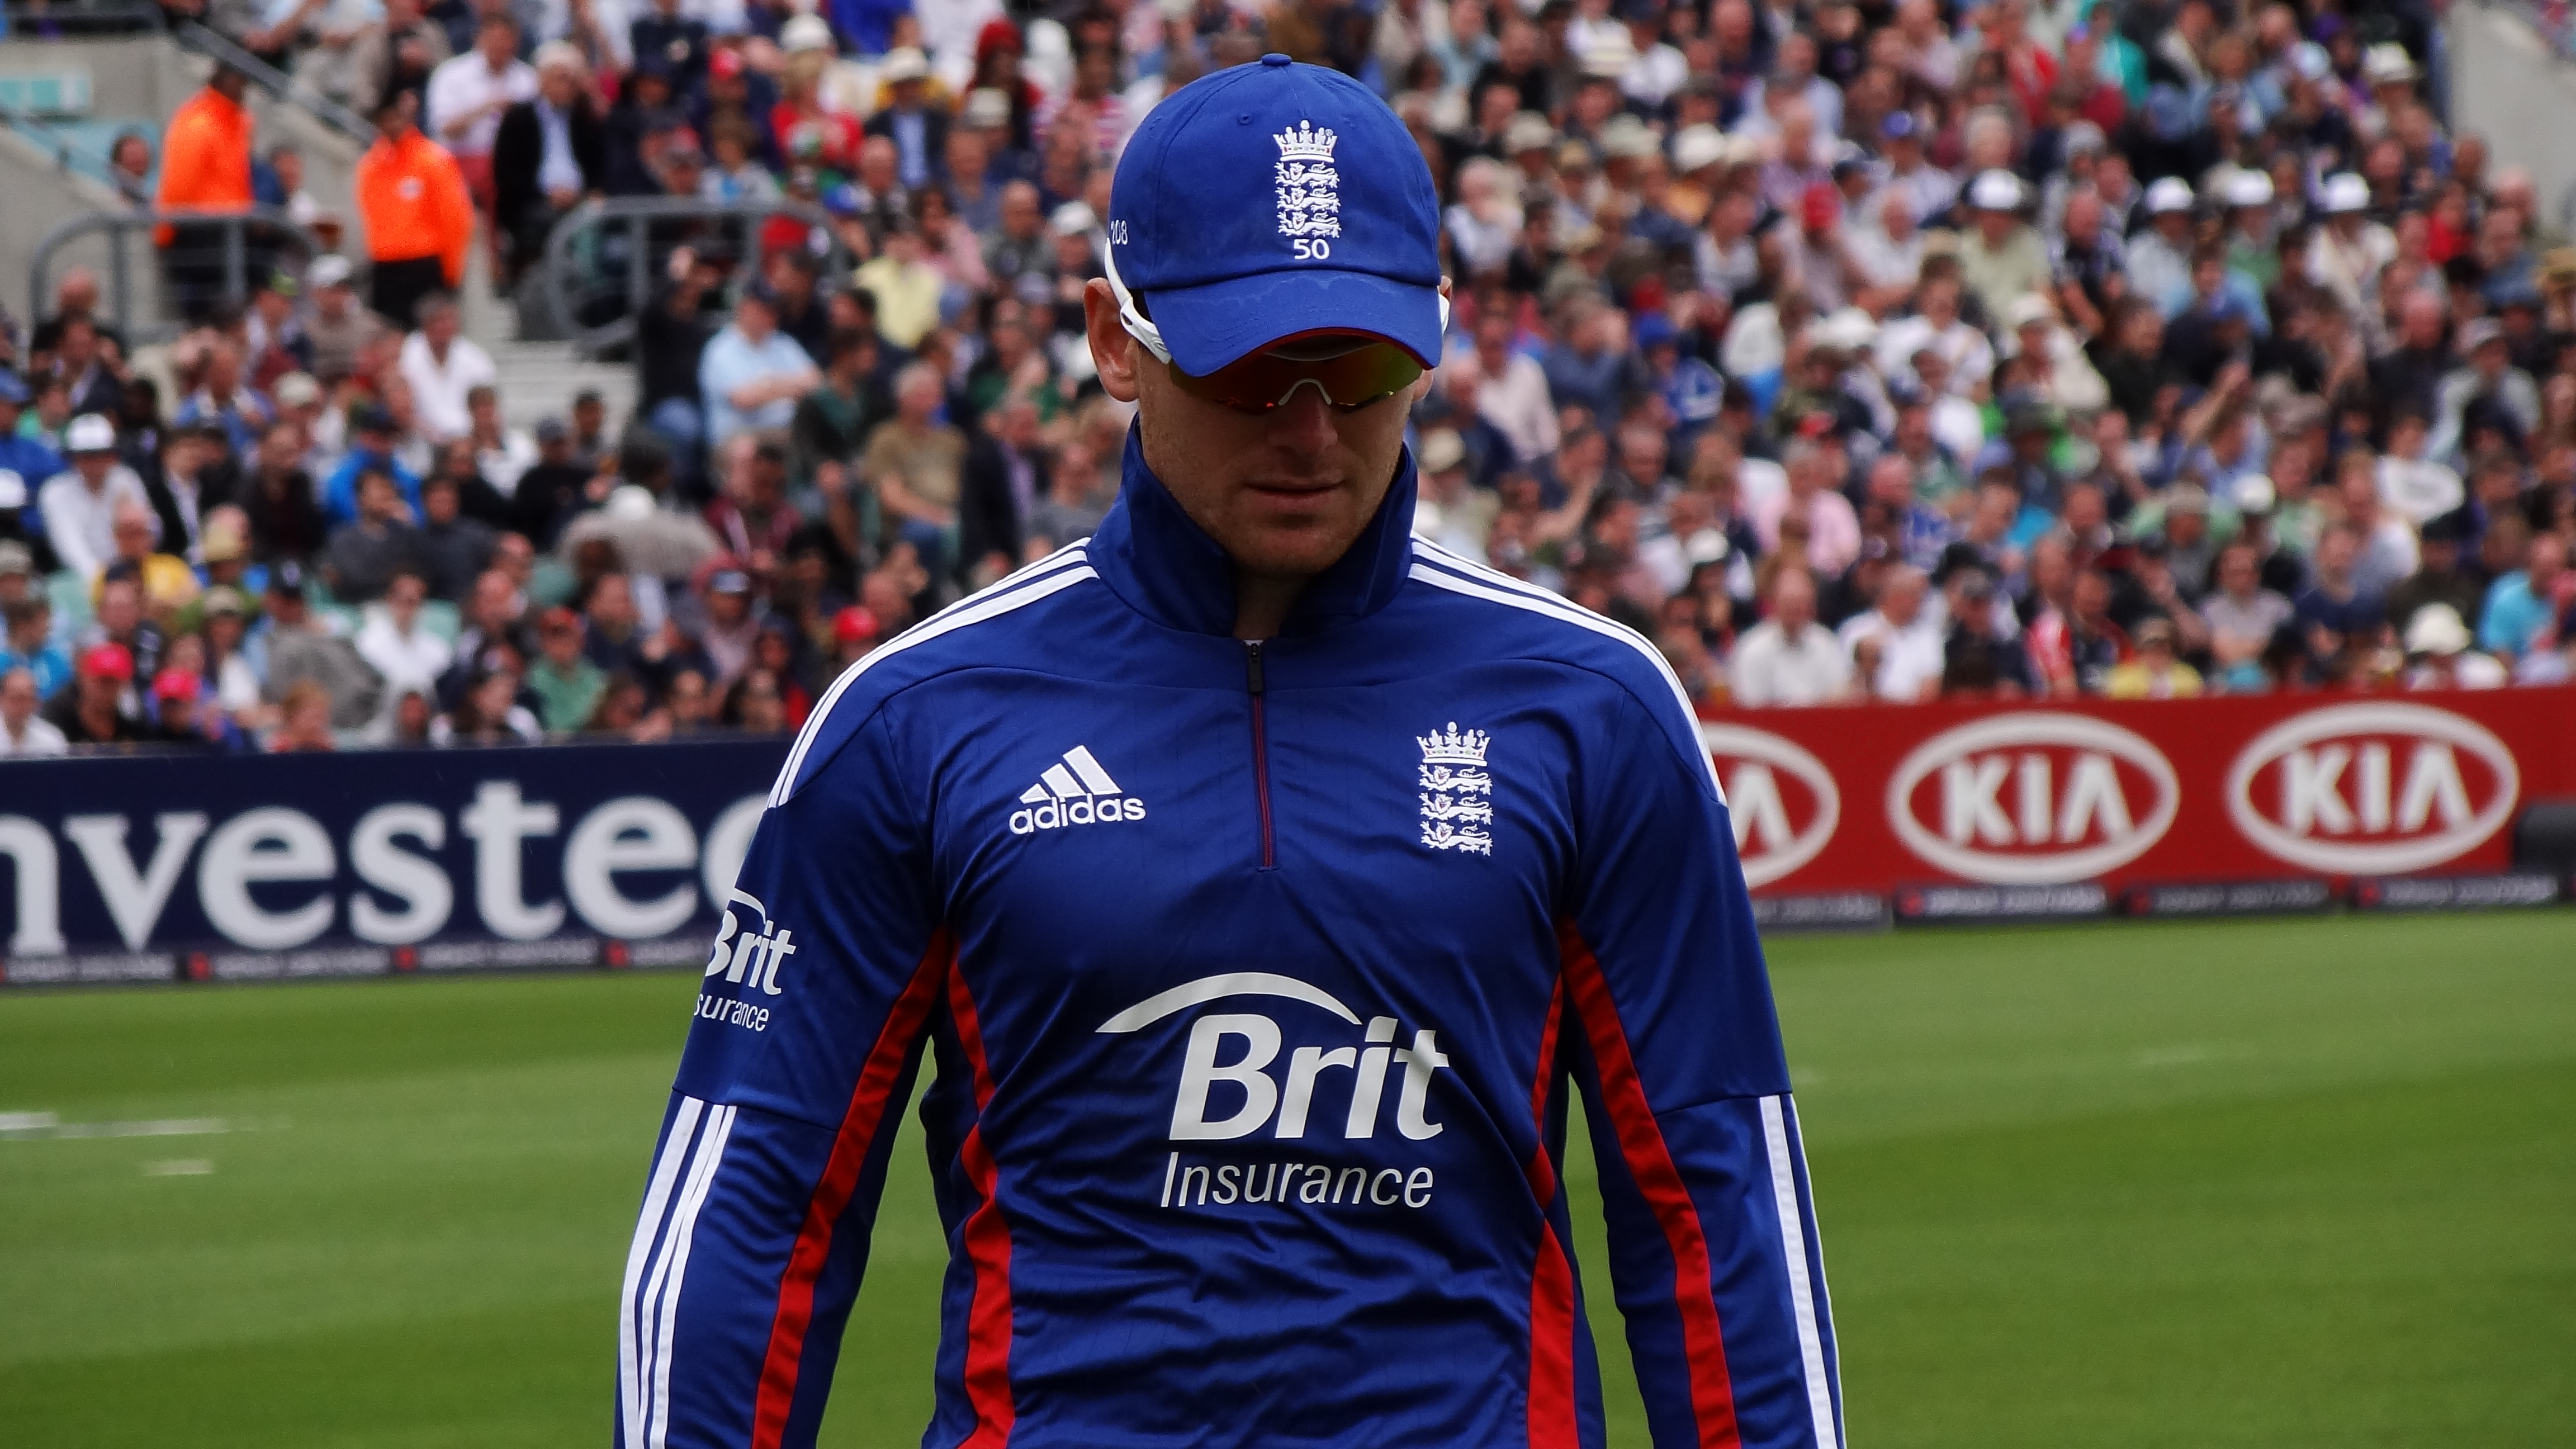 Eoin Morgan suspended for one ODI due to slow over-rate